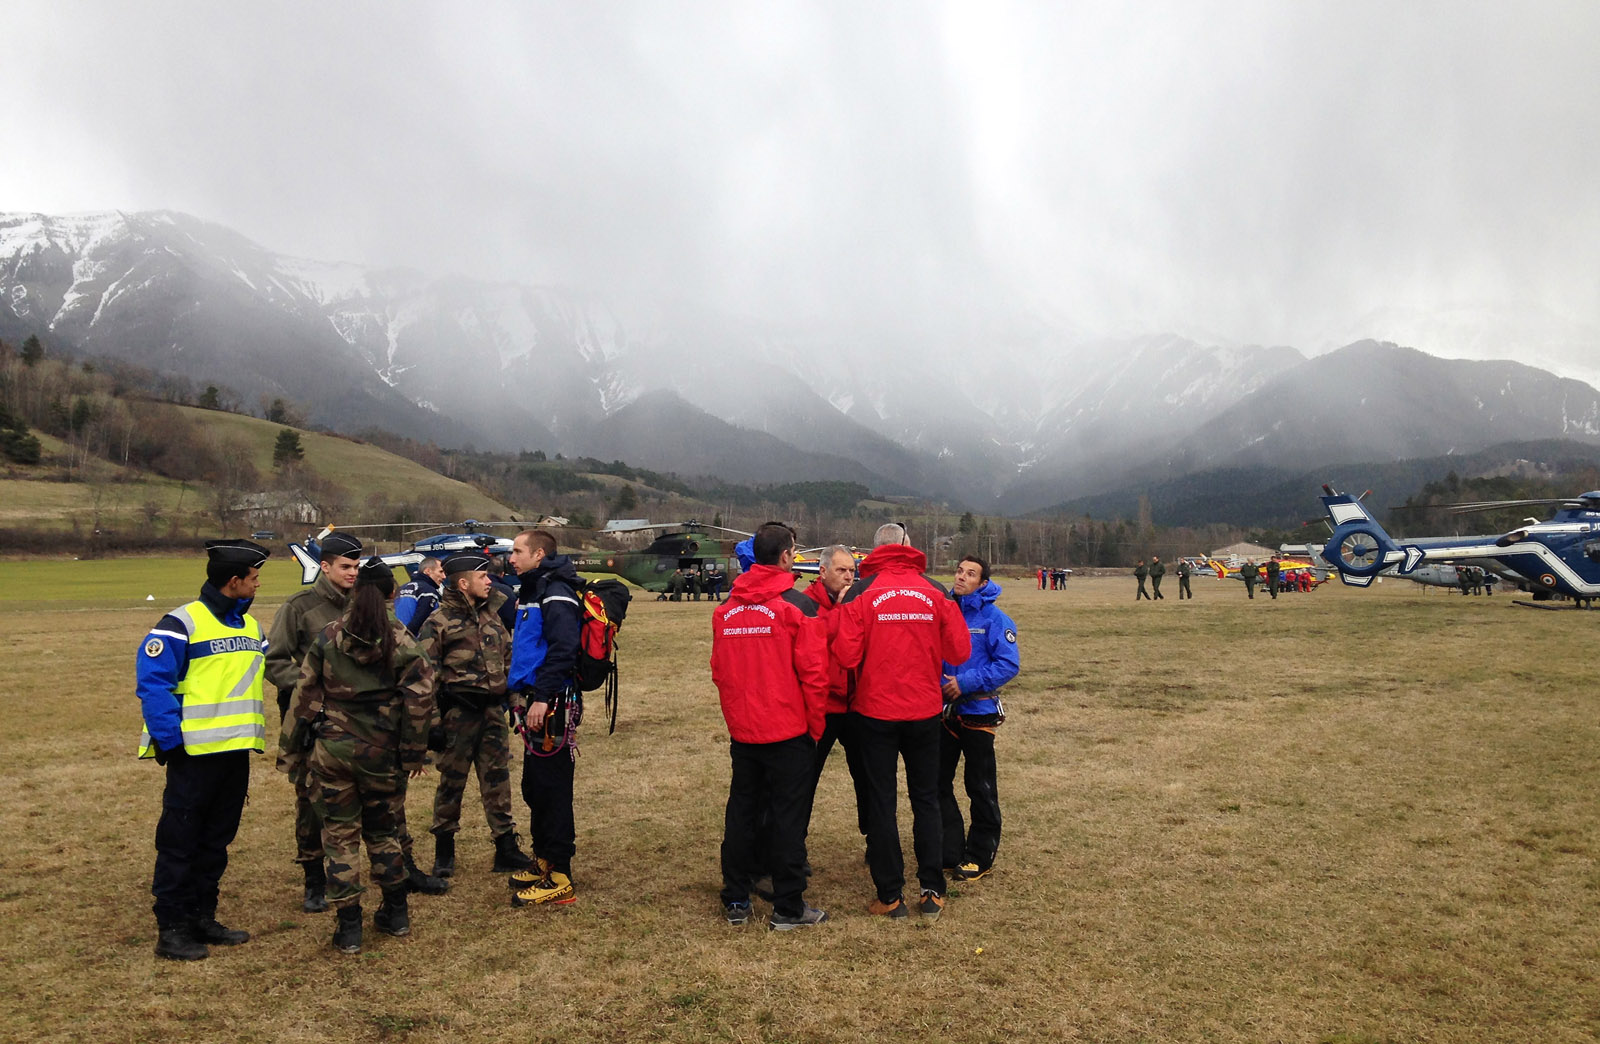 DIGNE, FRANCE- MARCH 24:  French mountain rescue teams and gendarmerie arrive near the site of the Germanwings plane crash in the French Alps on March 24, 2015 in Digne, France.  A Germanwings Airbus A320 airliner with 148 people on board has crashed in the French Alps. (Photo by Patrick Aventurier/Getty Images)